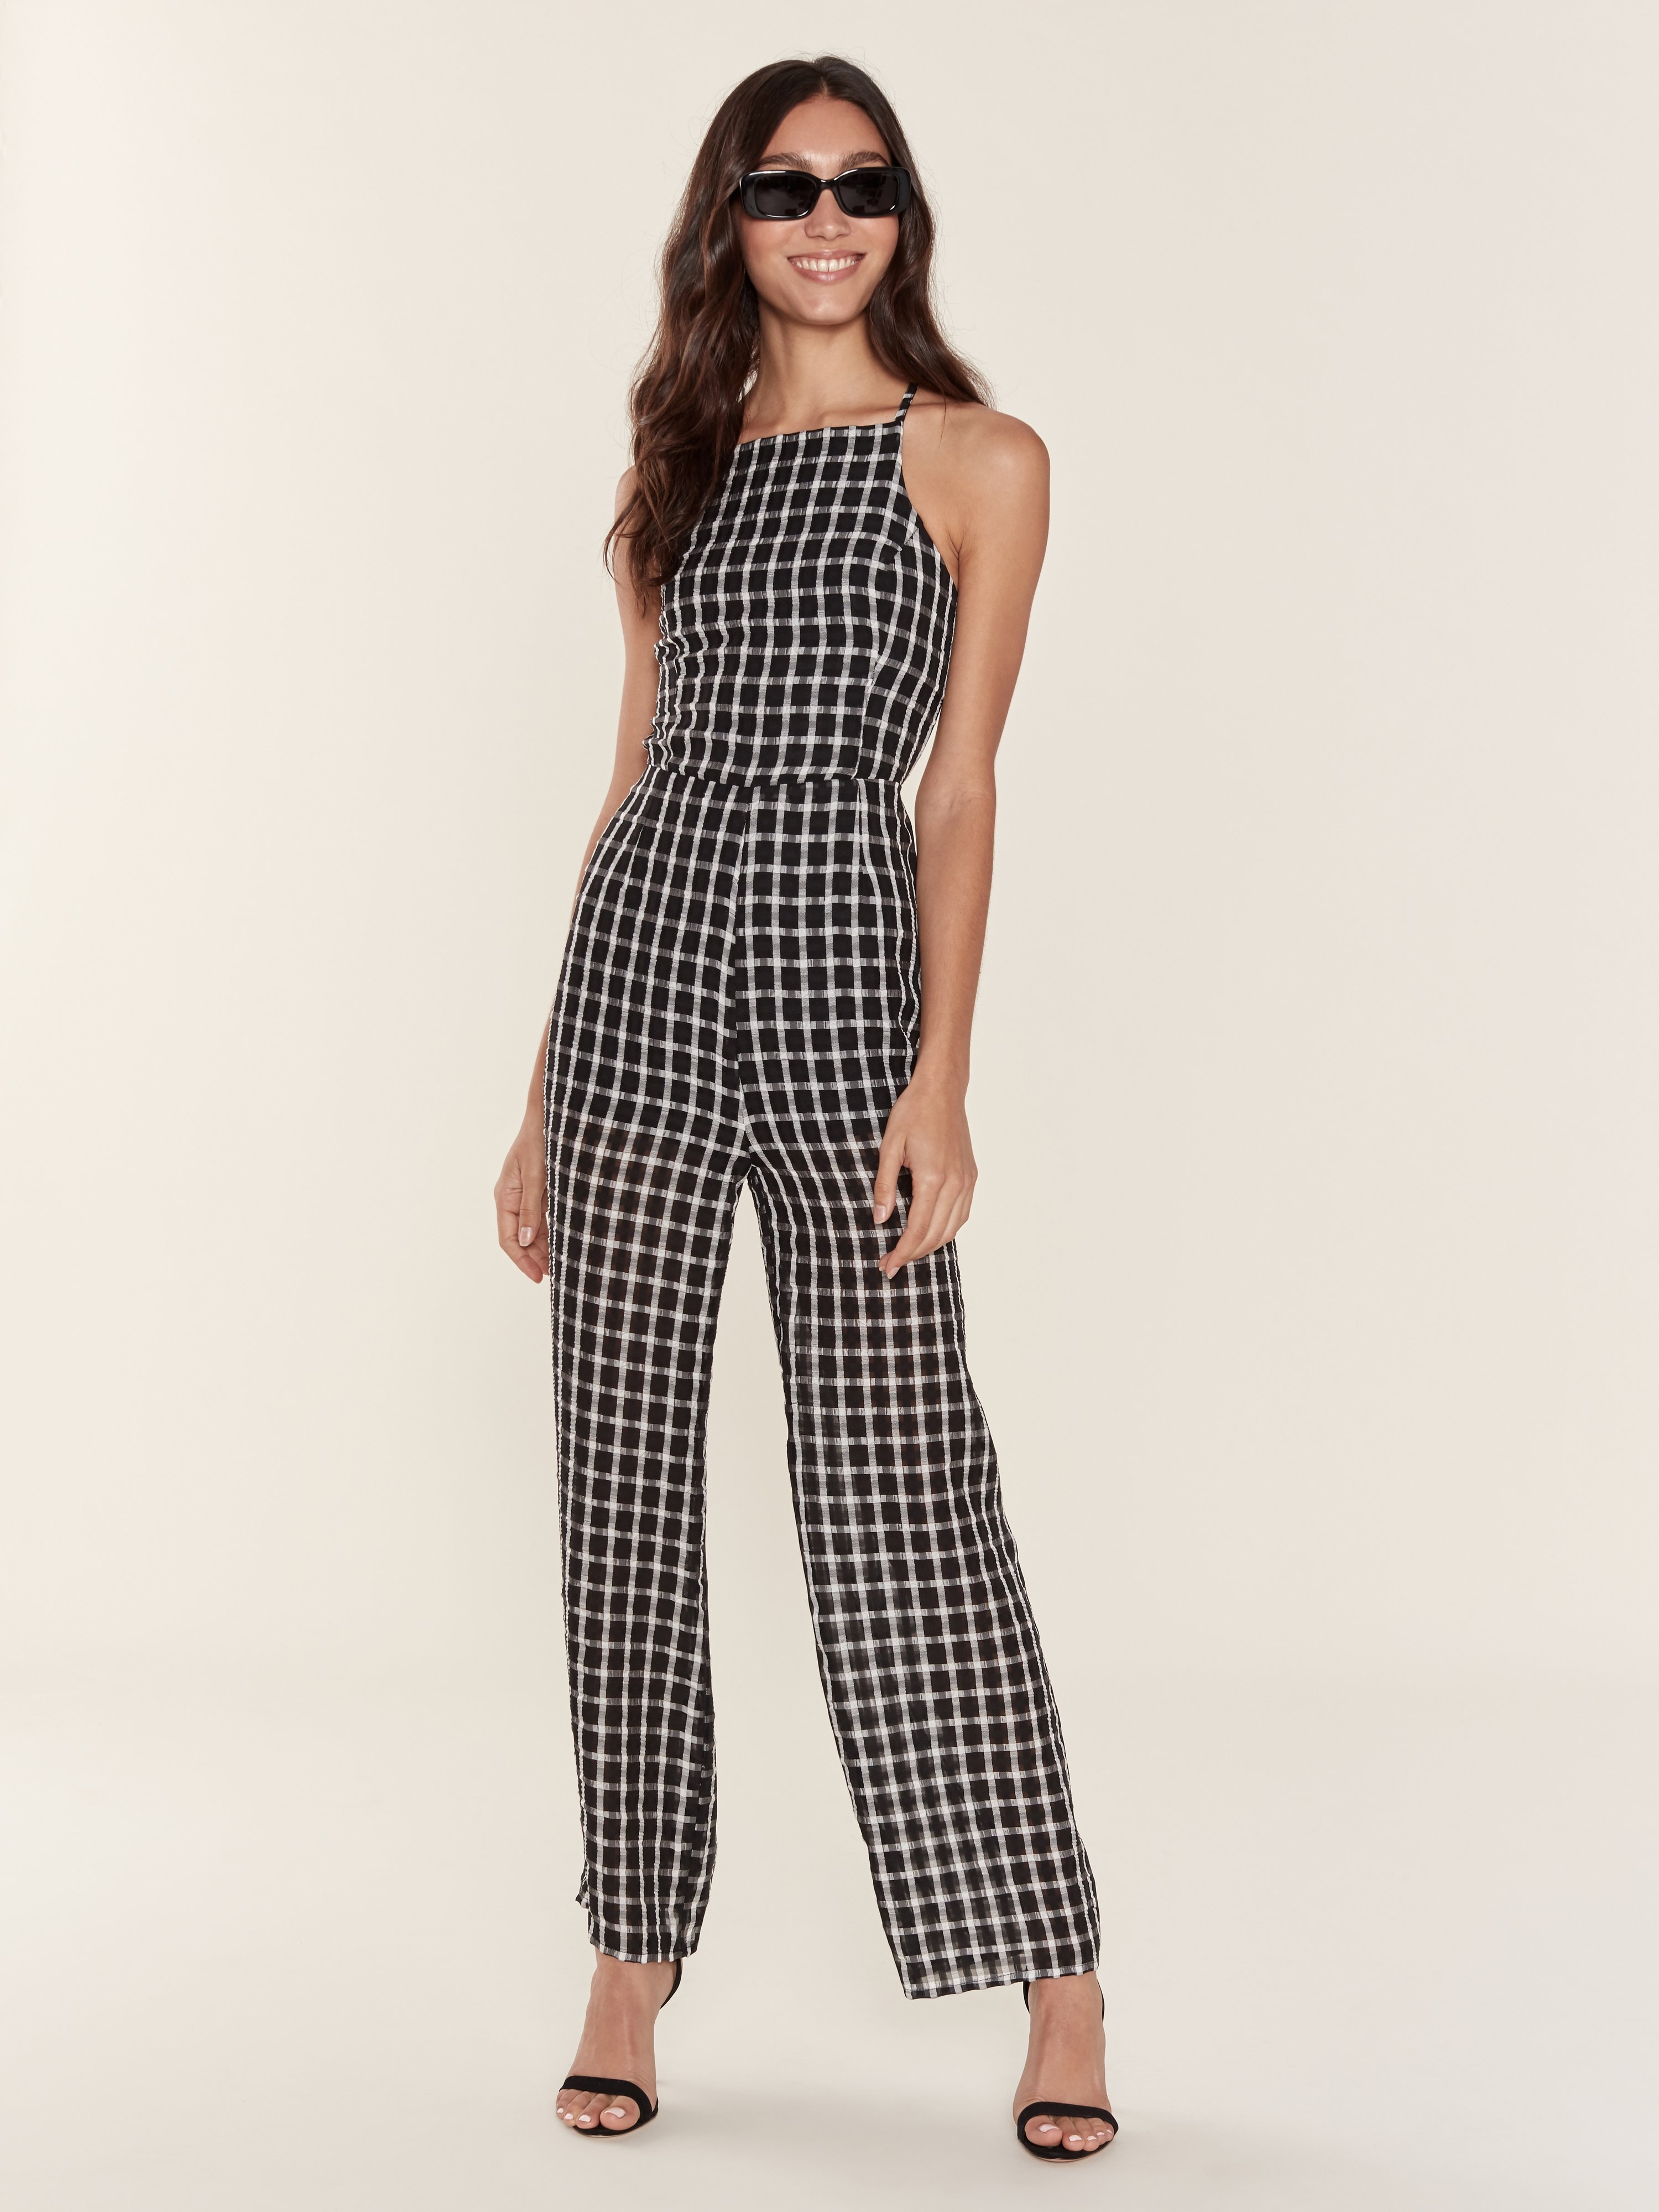 Finders Keepers Picnic Playsuit Romper In Check